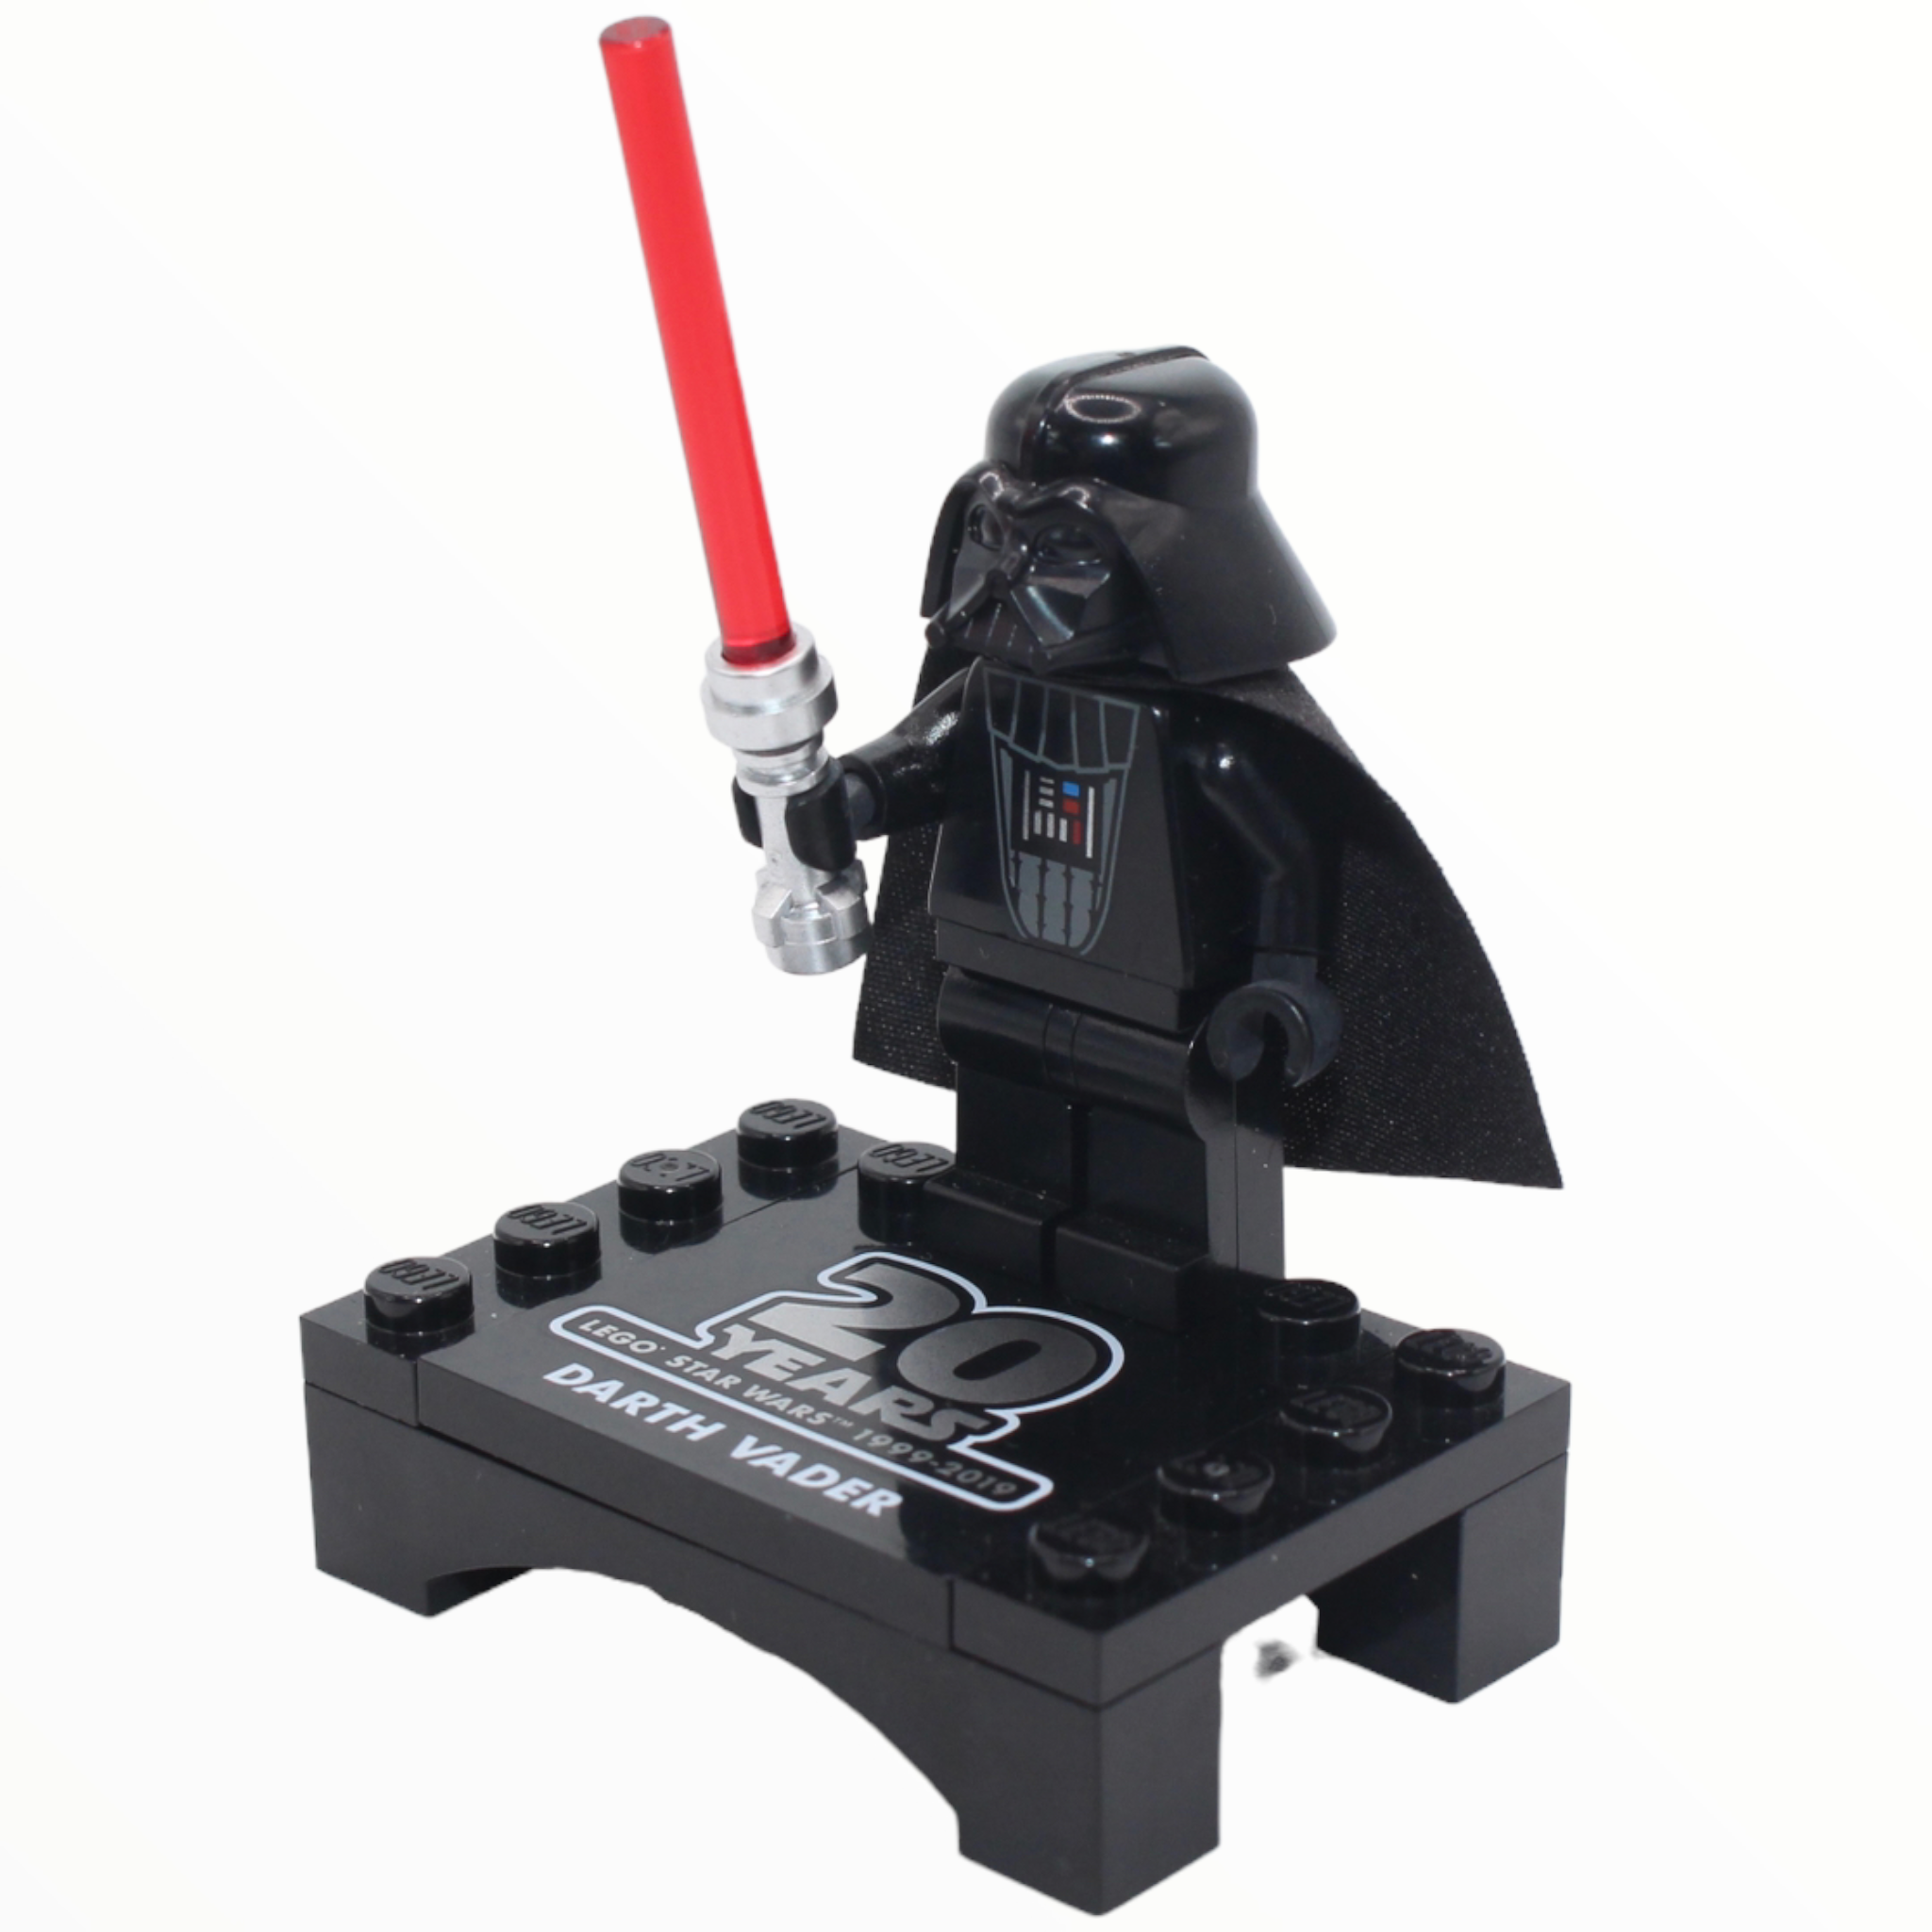 Darth Vader (20th Anniversary, with stand and lightsaber)